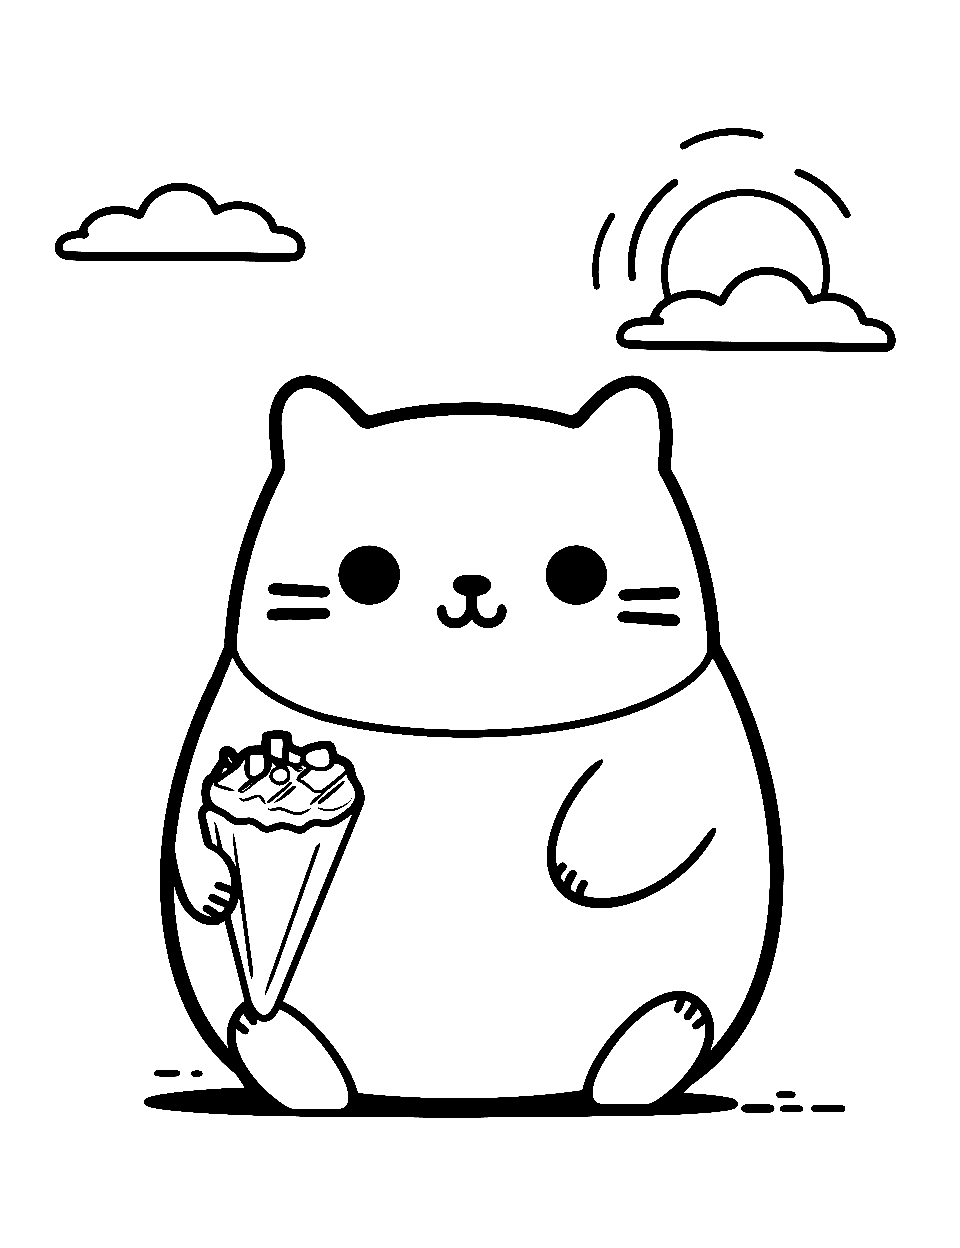 Enjoy Fun and Free Simon's Cat Coloring Pages